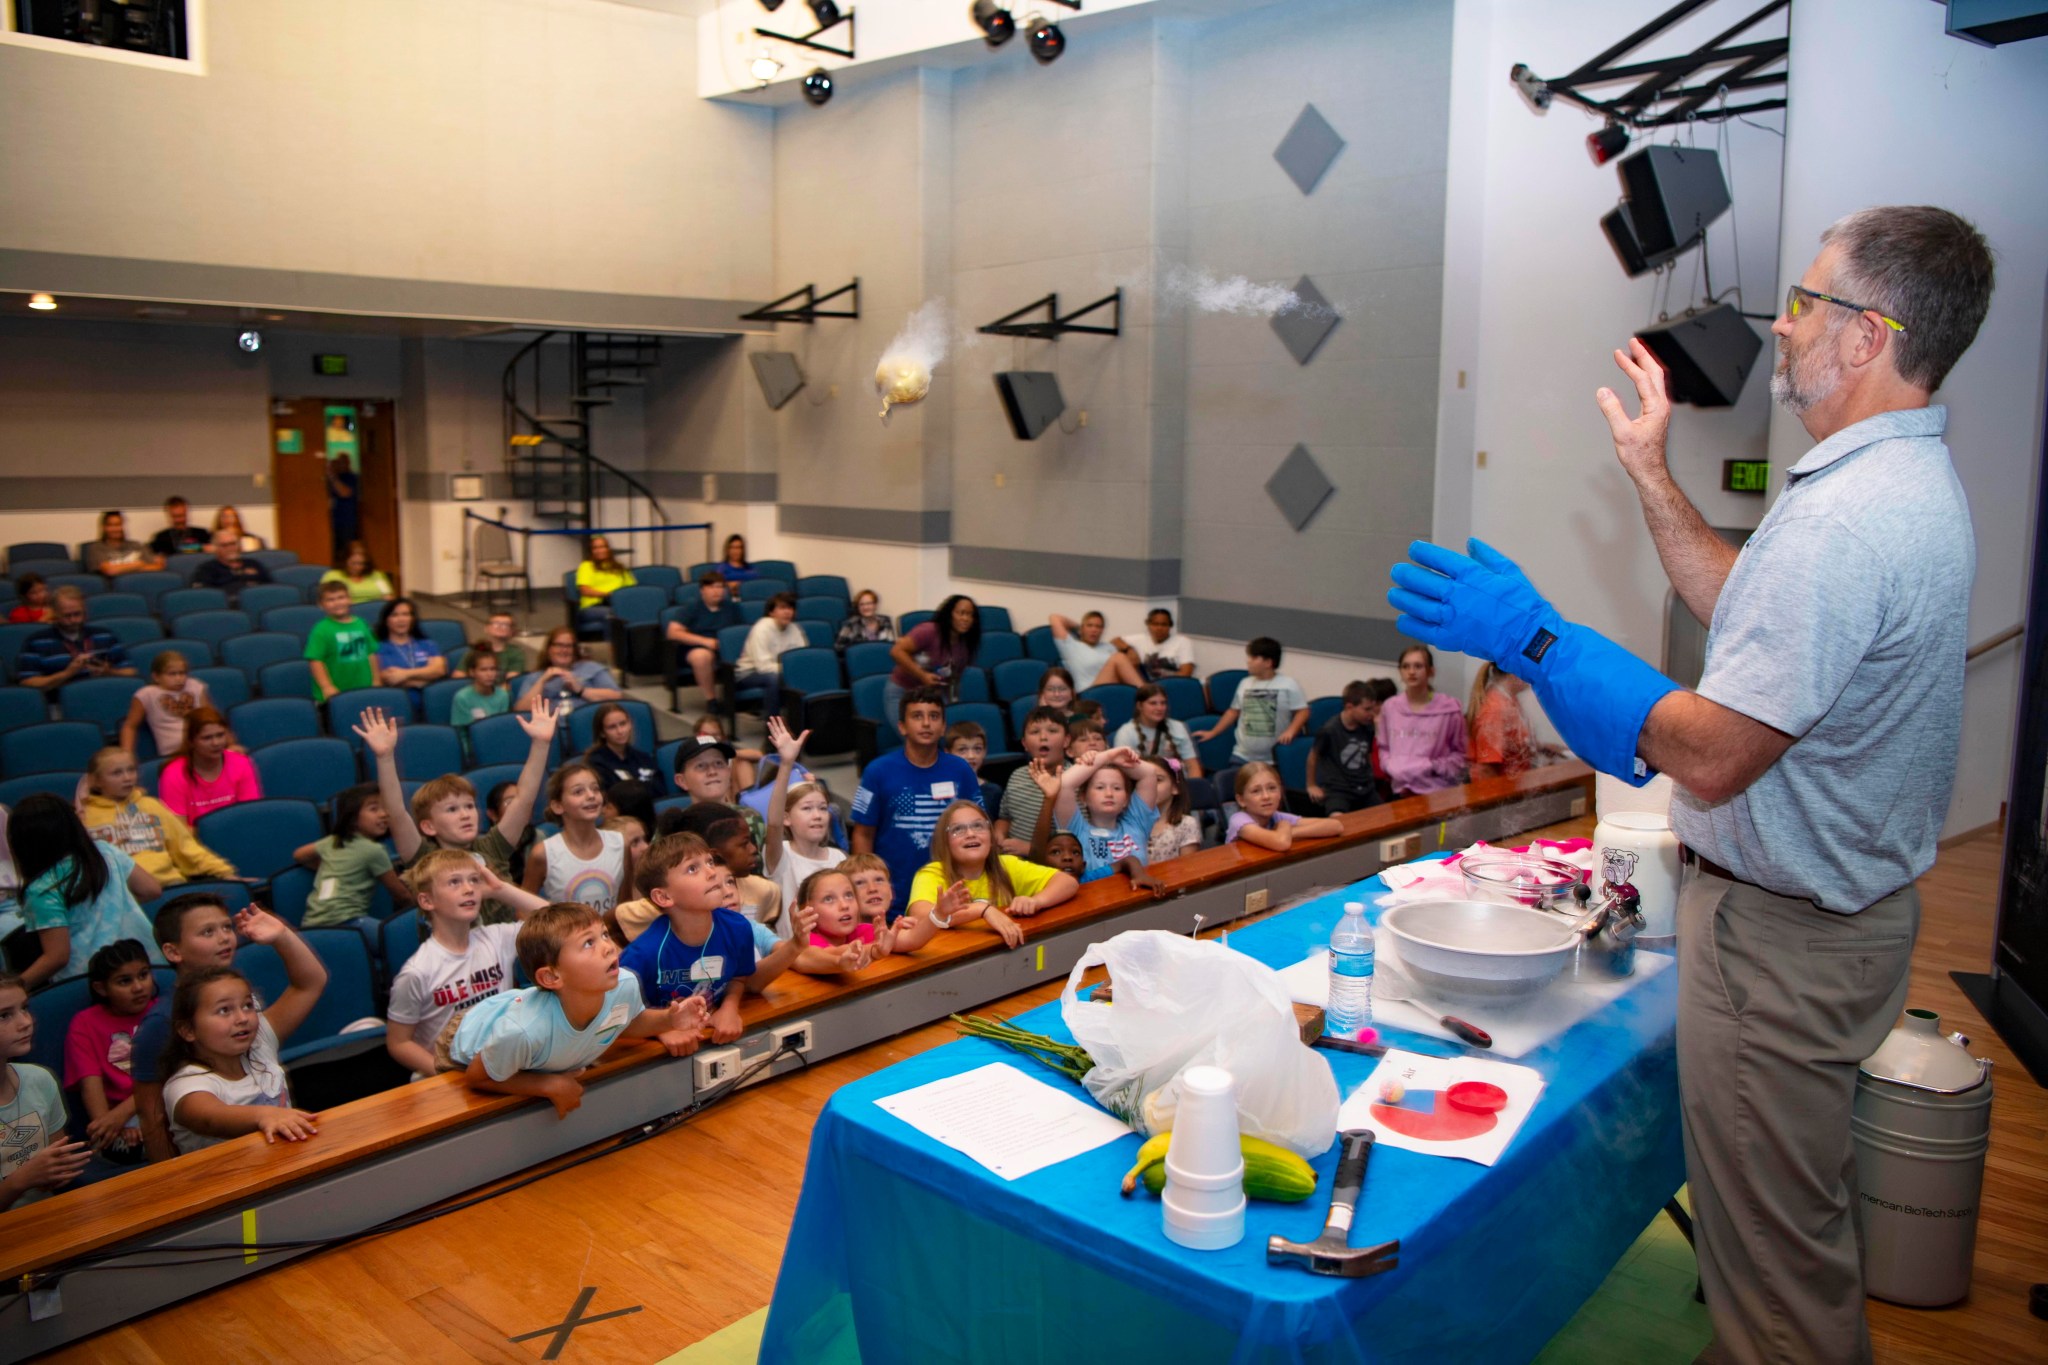 Allen Forsman demonstrates a cryogenics experiment as Take Our Children to Work Day participants watch on in amazement.